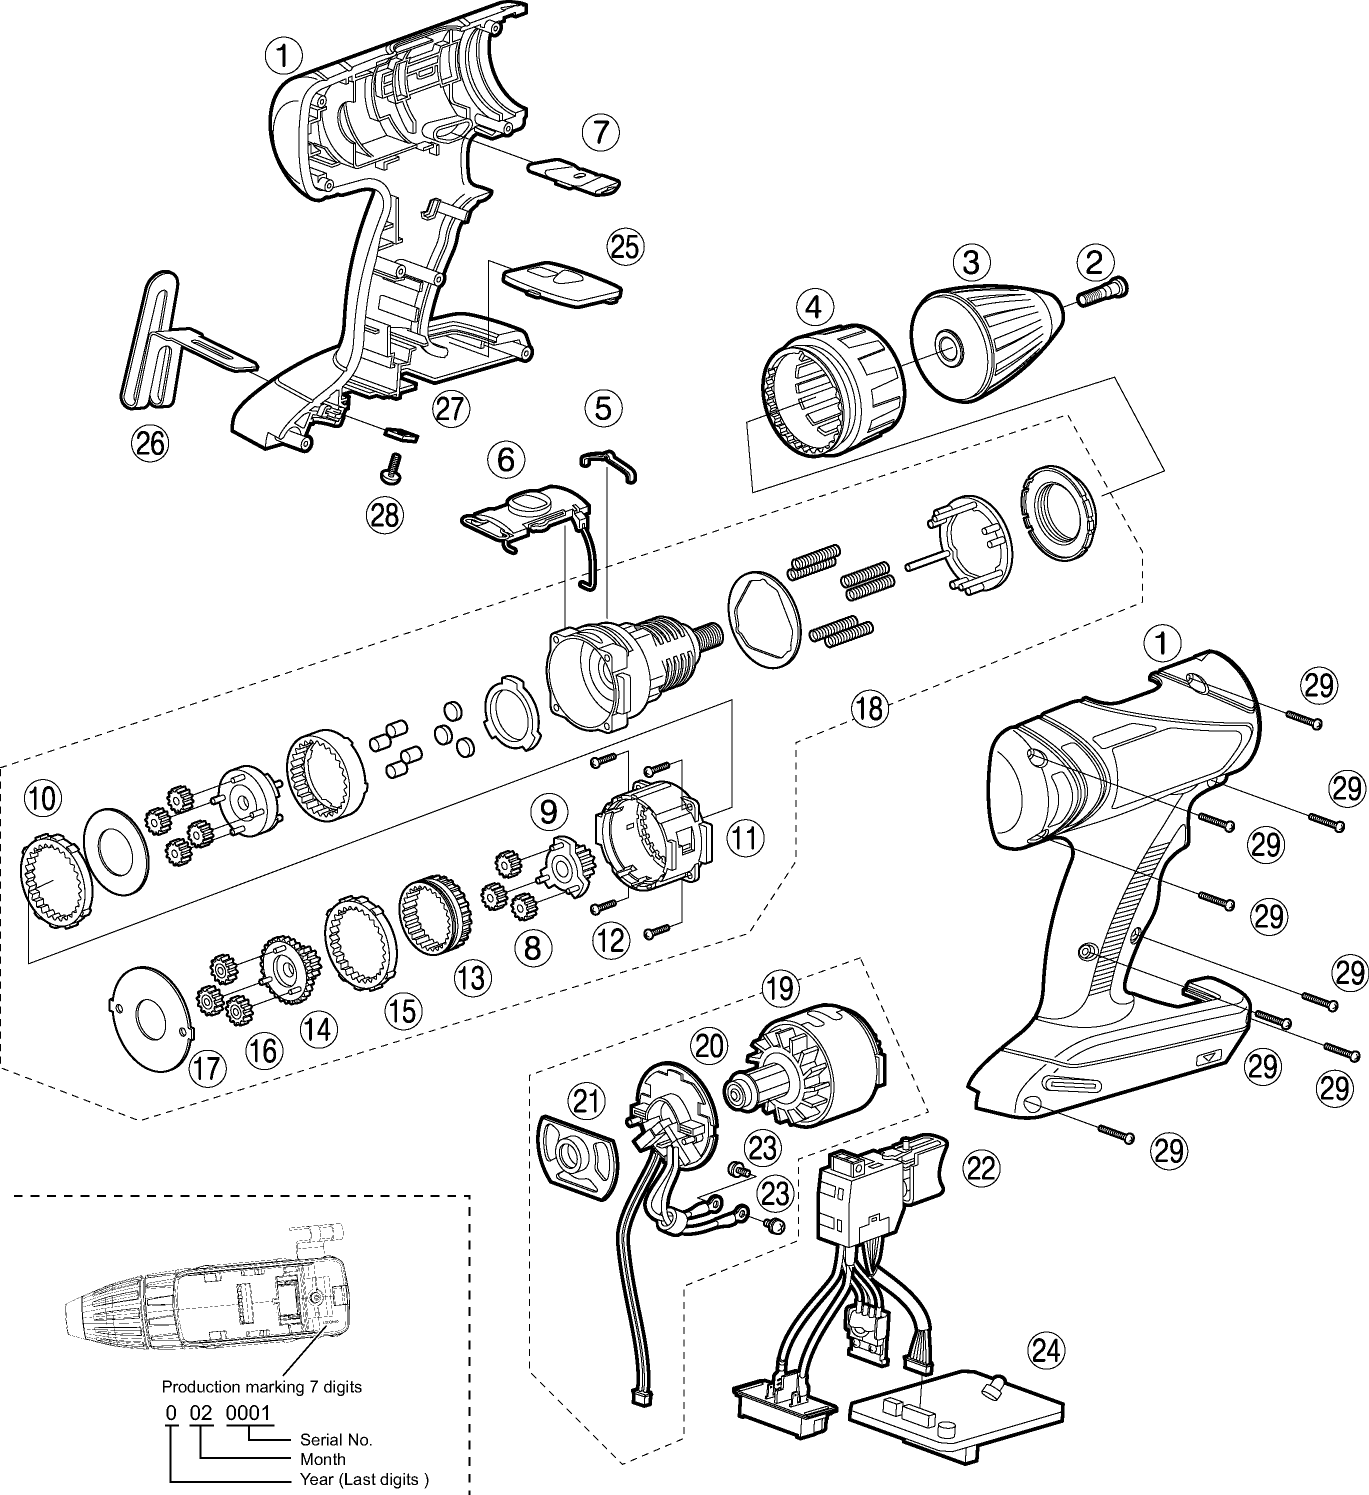 EY7940: Exploded View